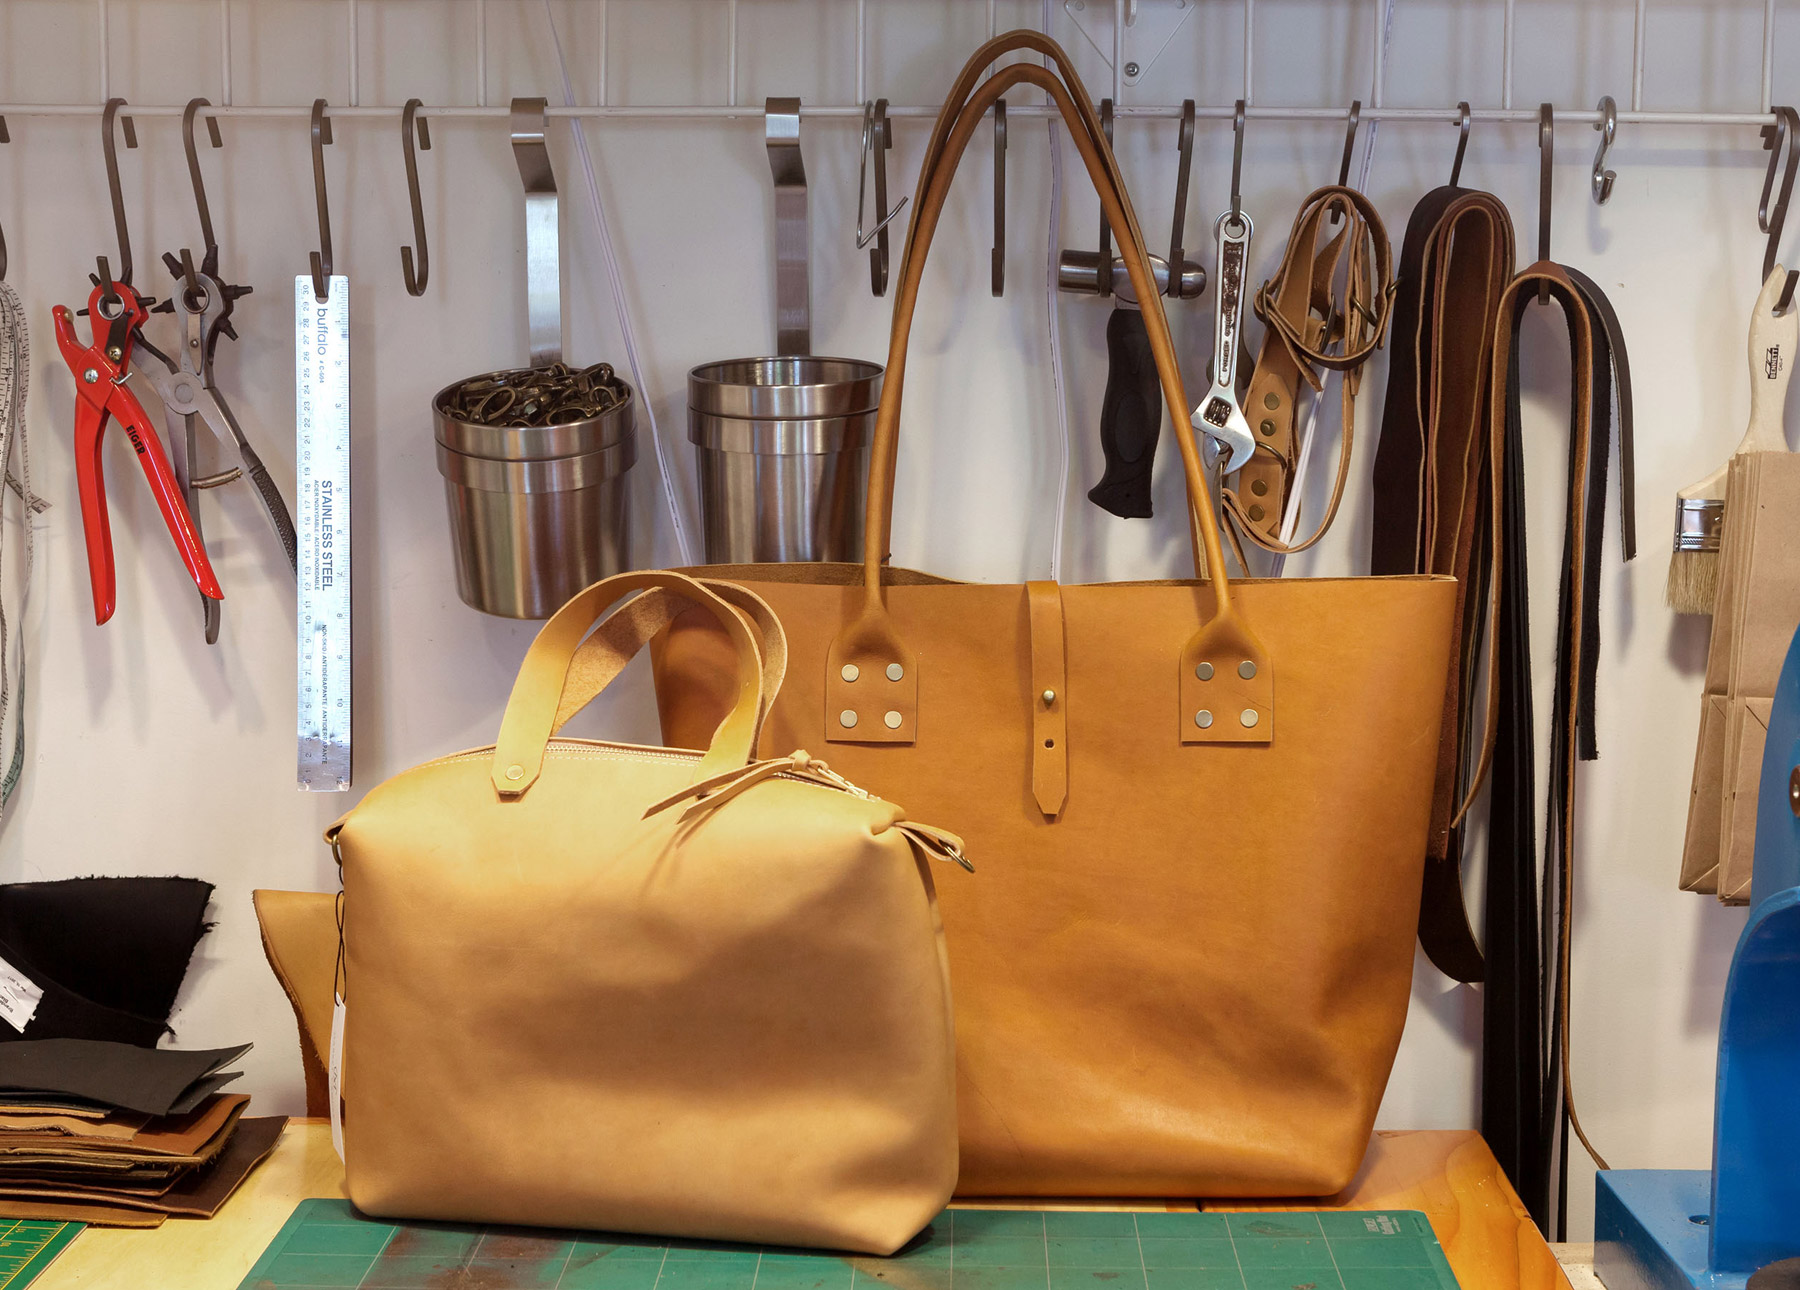 Article Blog featuring Market Canvas Leather in Tofino